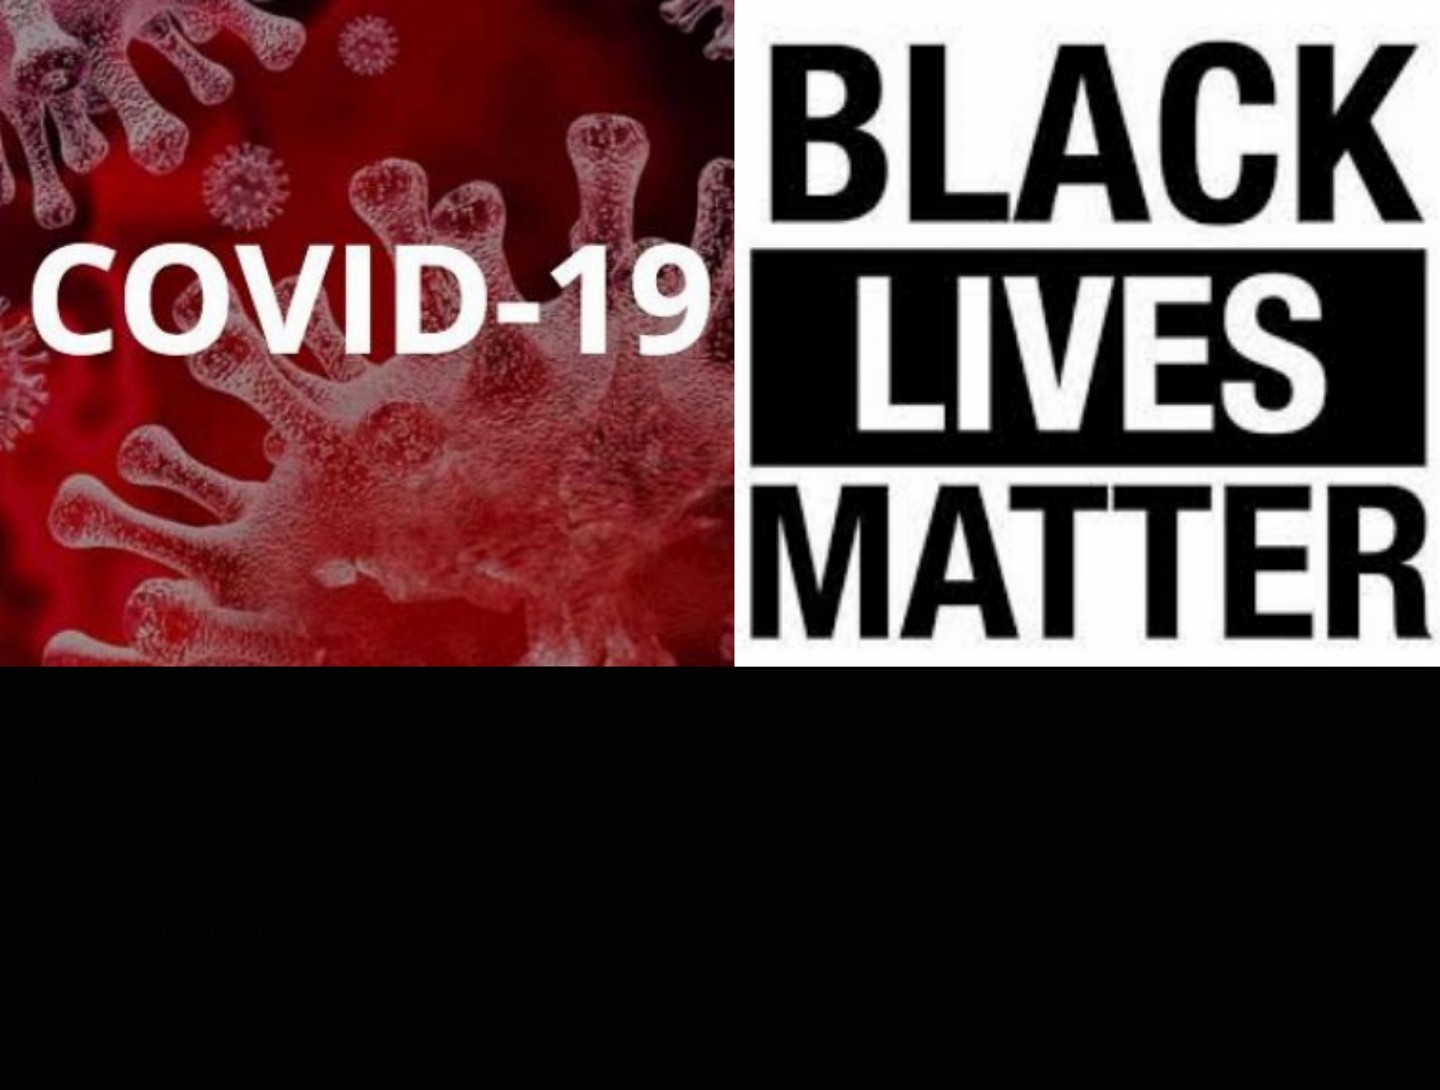 Spring Term Newsletter - Covid-19 and Black Lives Matter